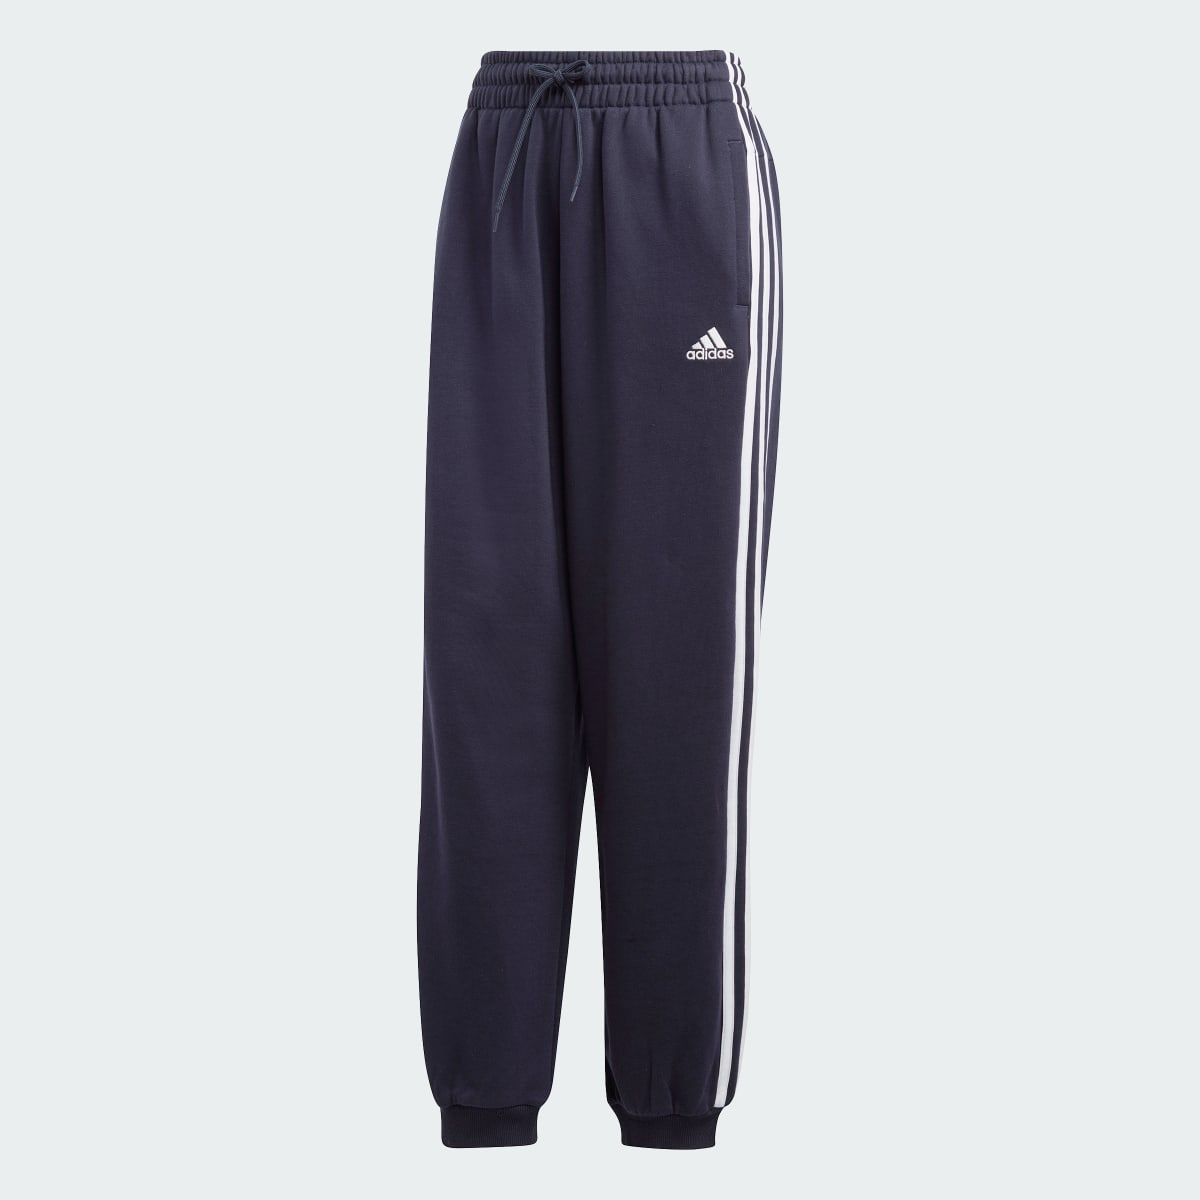 Adidas Essentials 3-Stripes French Terry Loose-Fit Pants. 4